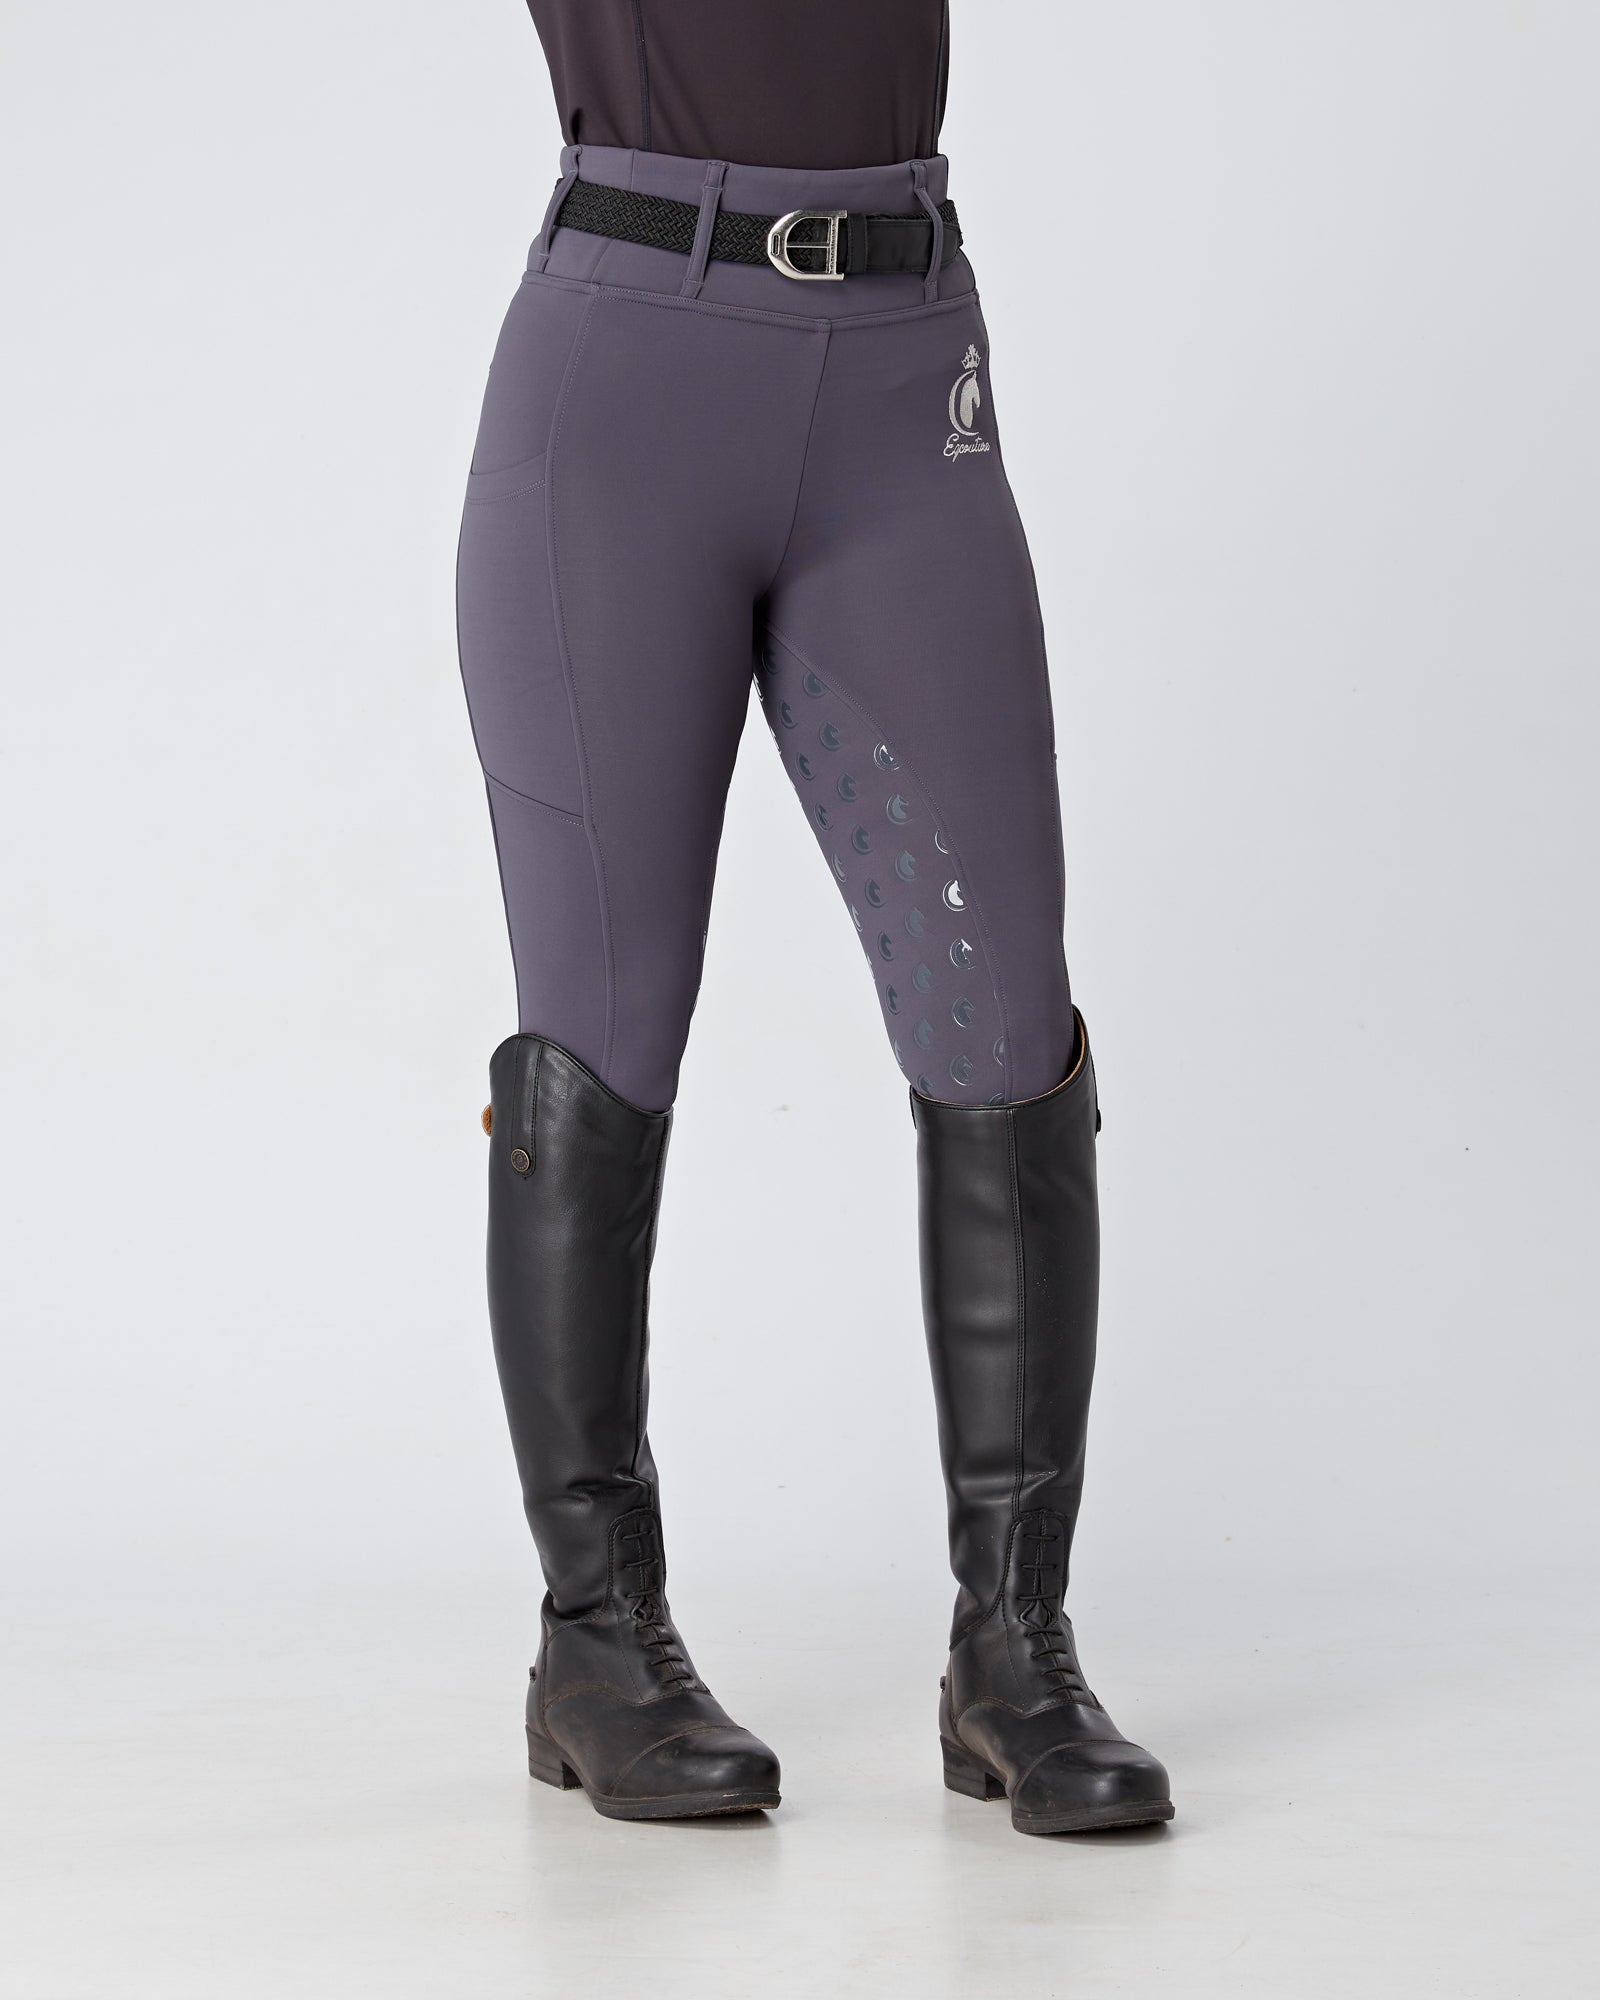 WINTER Thermal Slate Grey Riding Leggings / Tights with Pockets - WATER RESISTANT